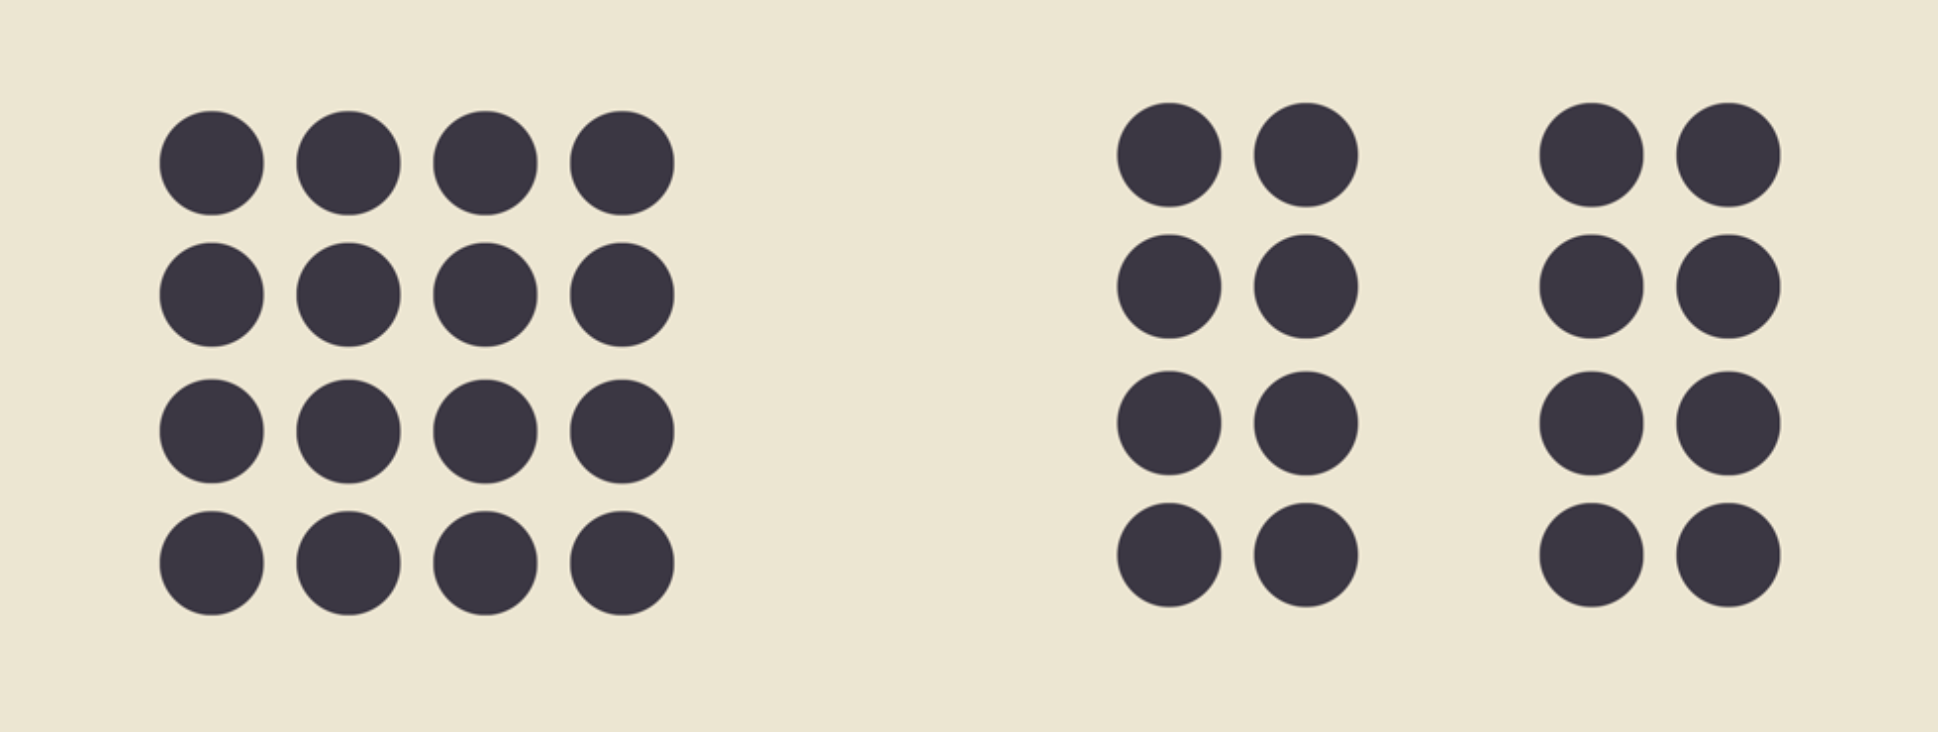 Diagram of dots showing a single cluster on one side and a pair of clusters on the other side